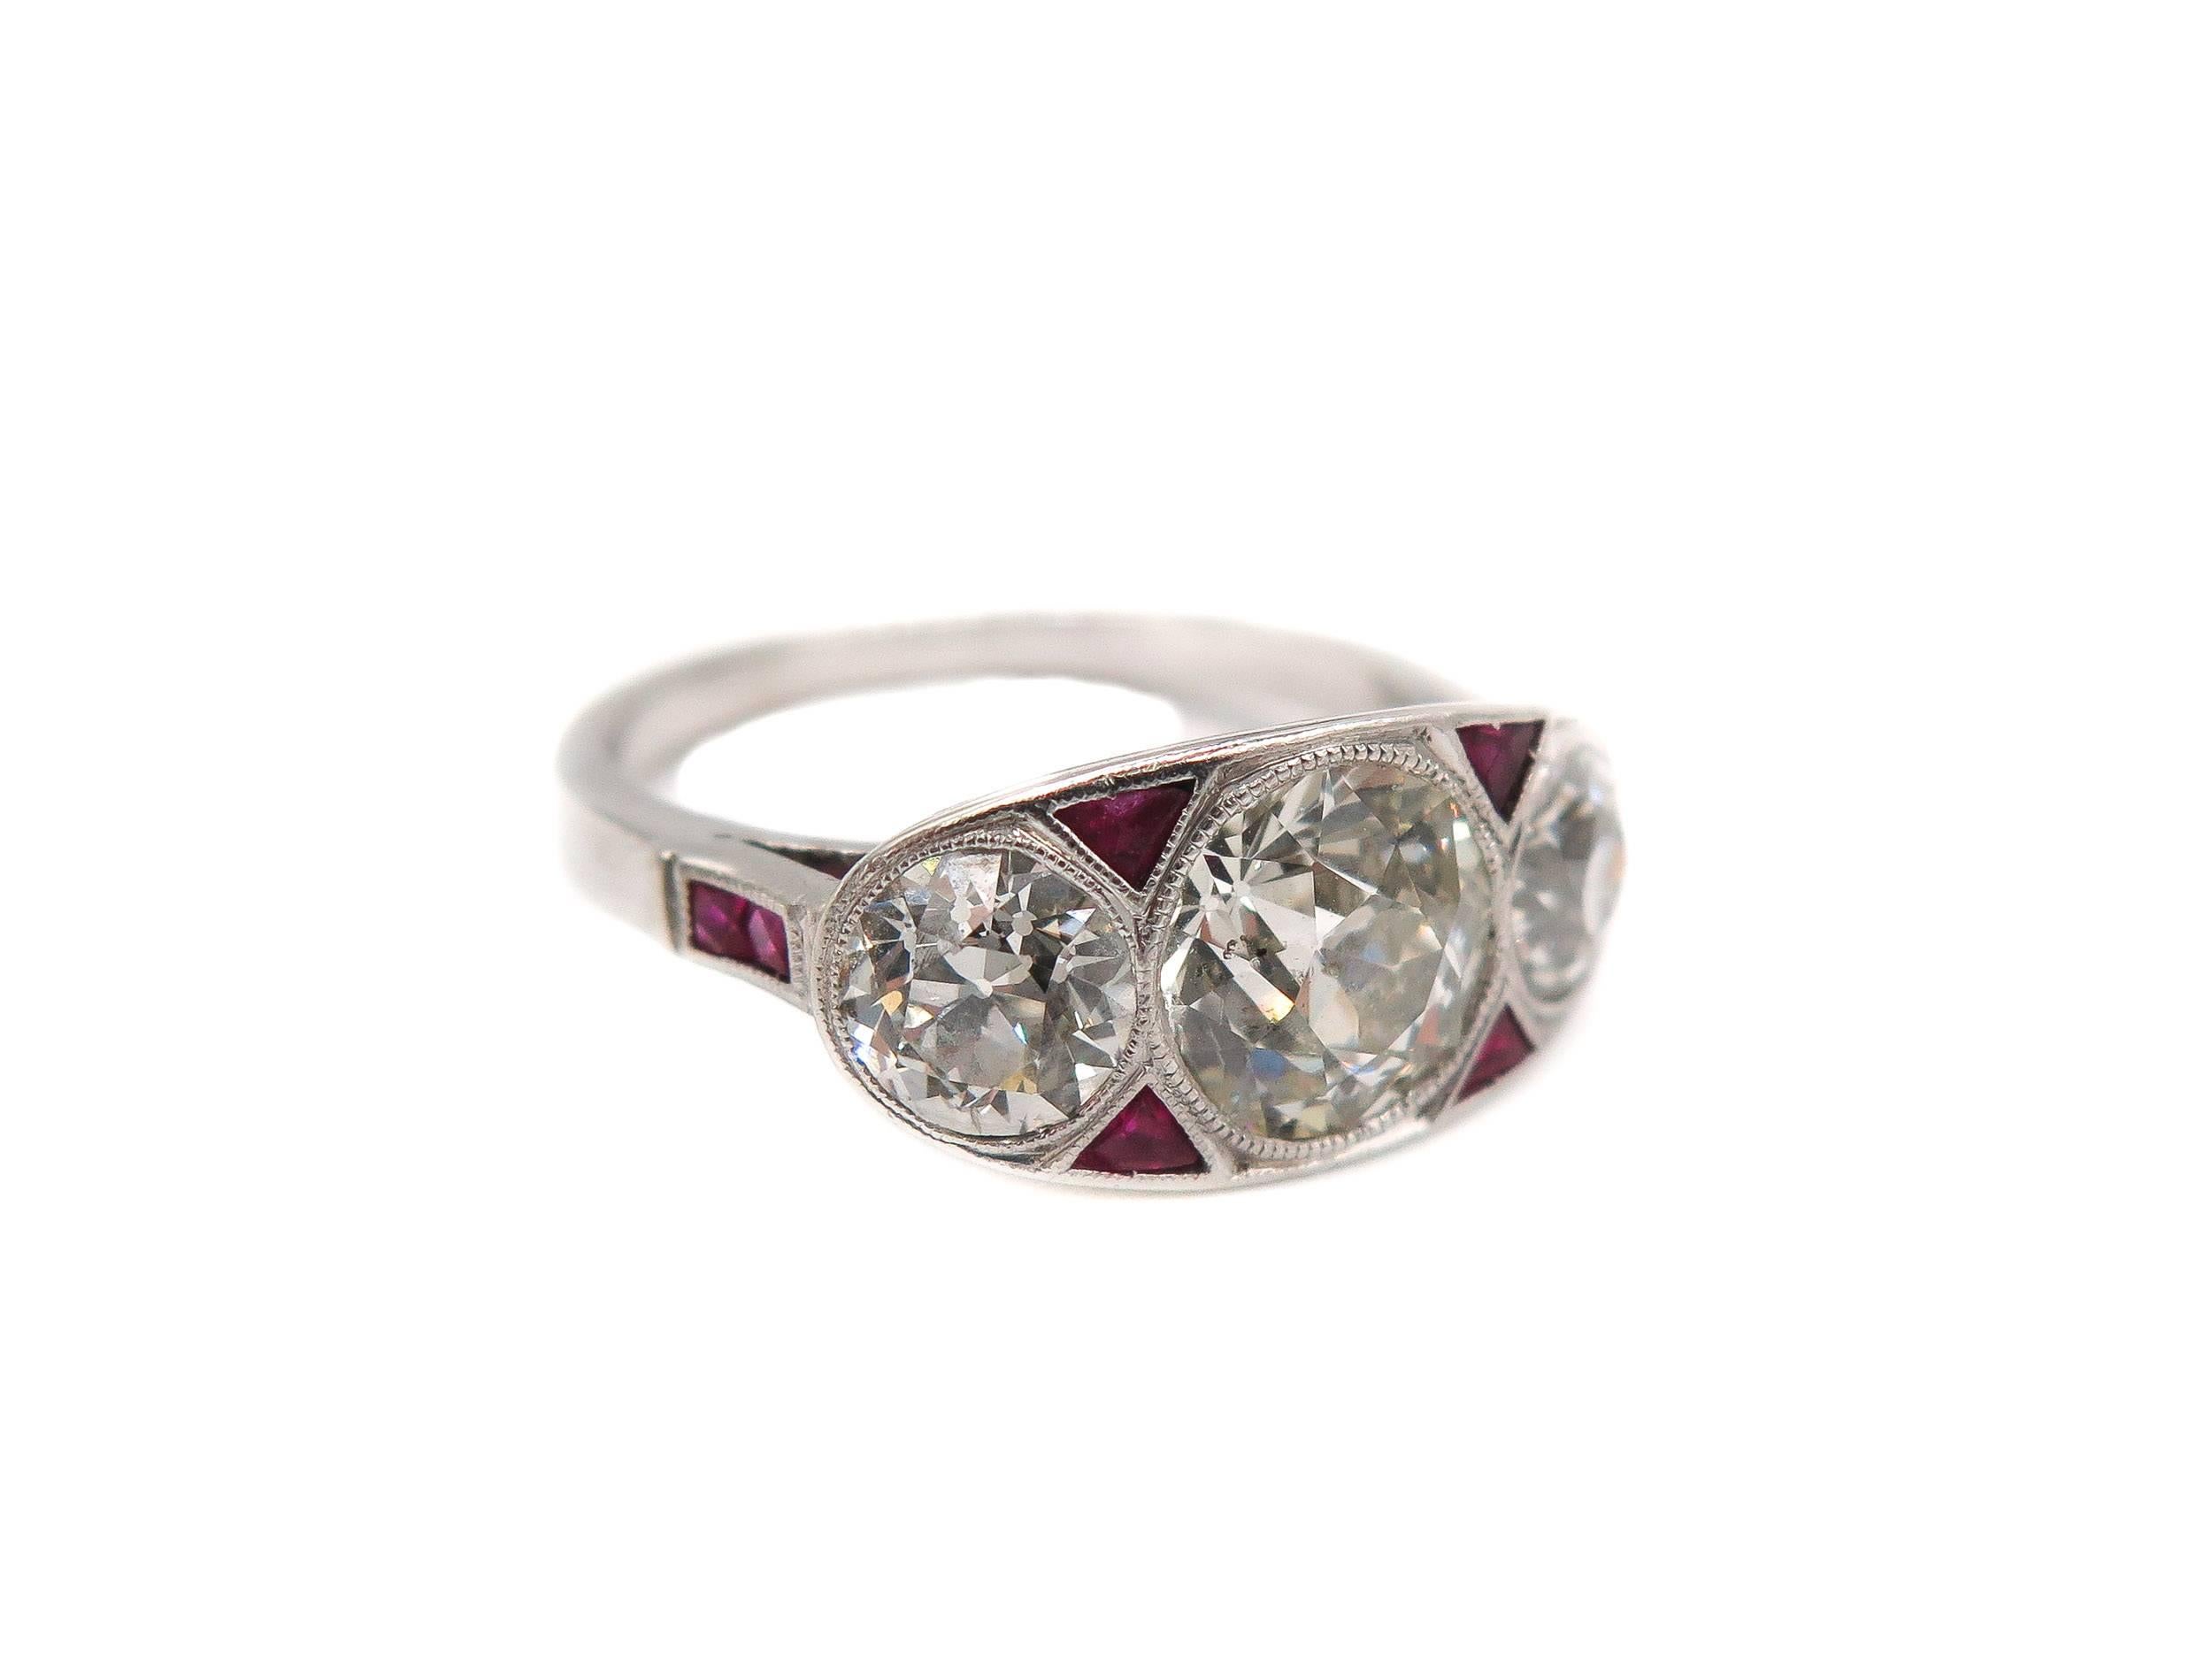 This gorgeous art deco platinum 3 stone ring is unlike anything you have seen before!
The diamonds are old european cut, G-H in color and SI1 in clarity, the center diamond weights approximately 1.75 carats and the side diamonds have a 1.20 carat